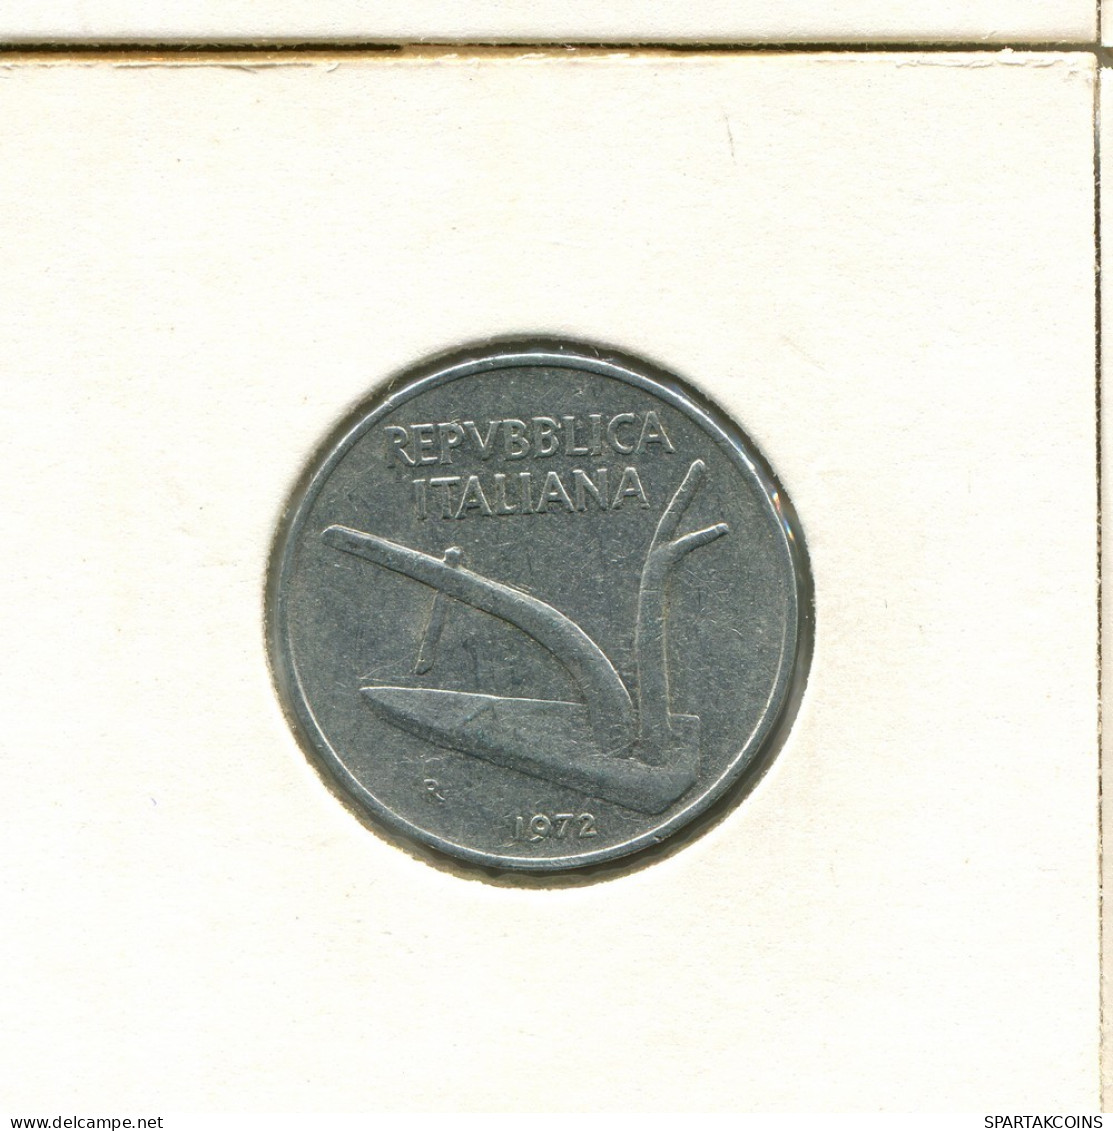 10 LIRE 1972 ITALY Coin #AT730.U.A - 10 Lire